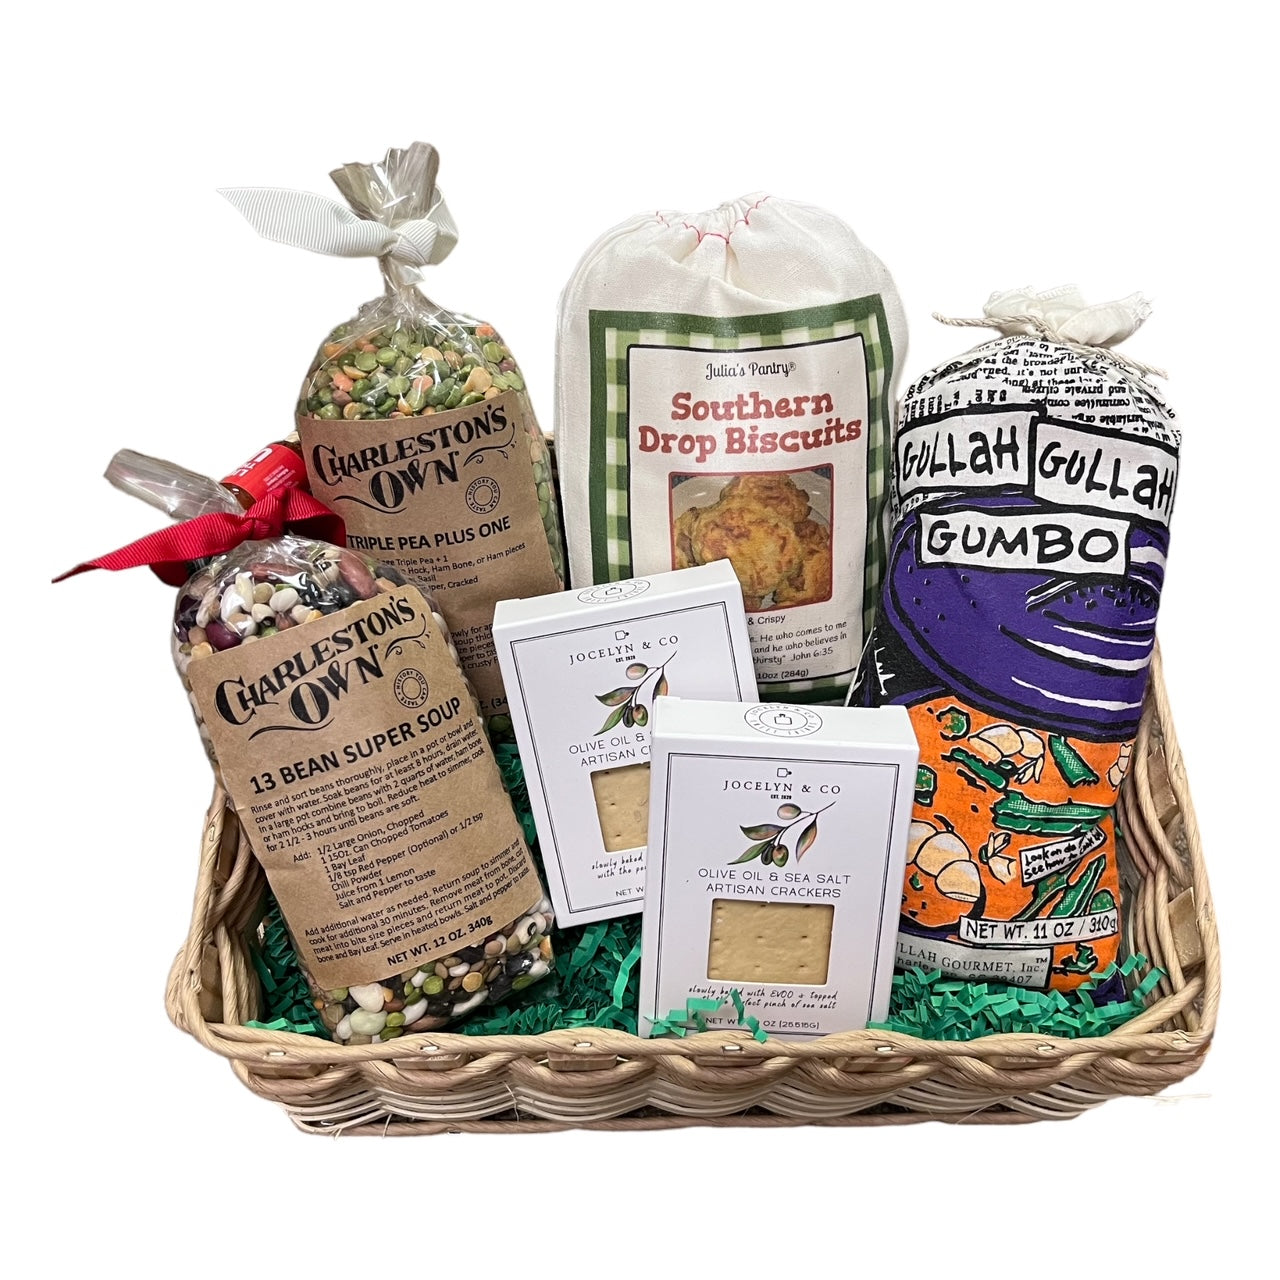 soup gift baskets